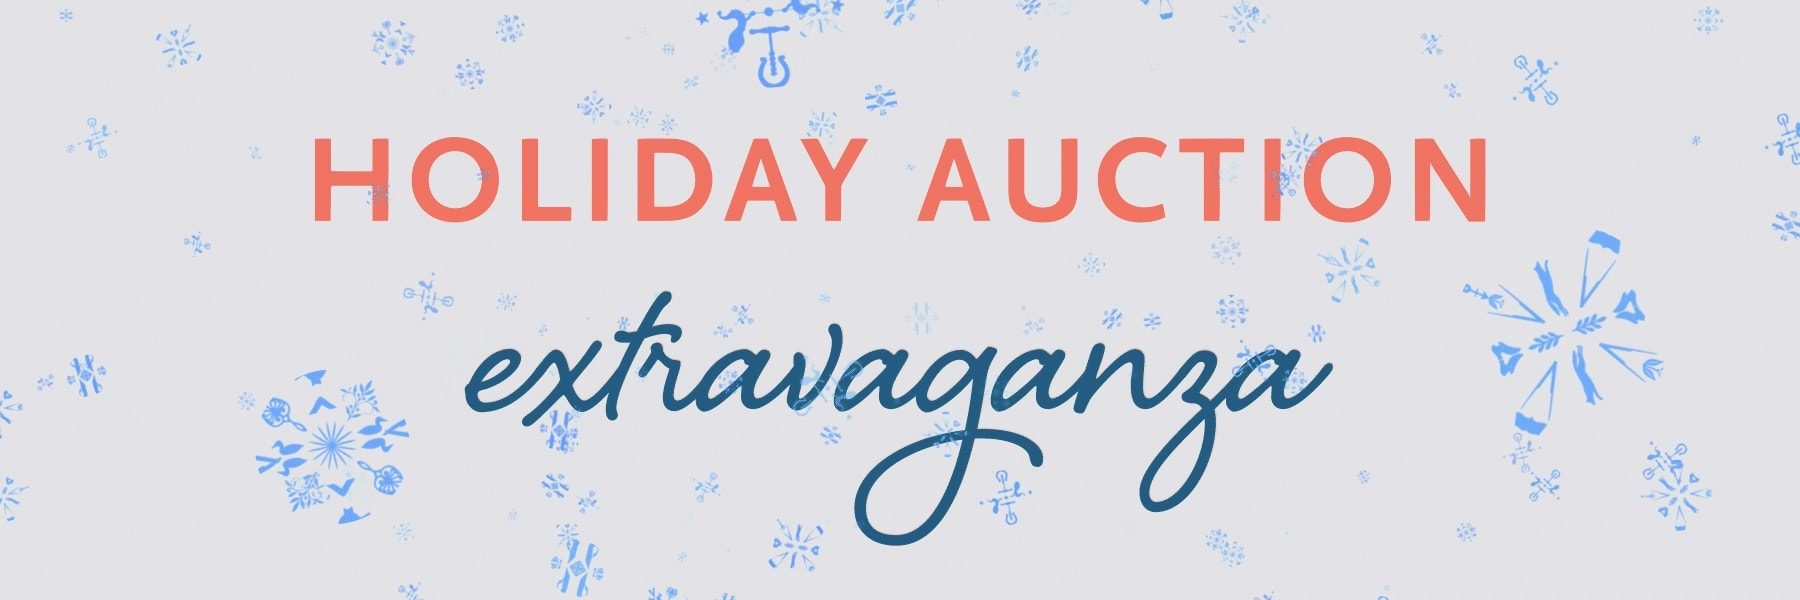 SHELBURNE MUSEUM’s HOLIDAY AUCTION EXTRAVAGANZA RETURNS NOVEMBER 14-21, 2021